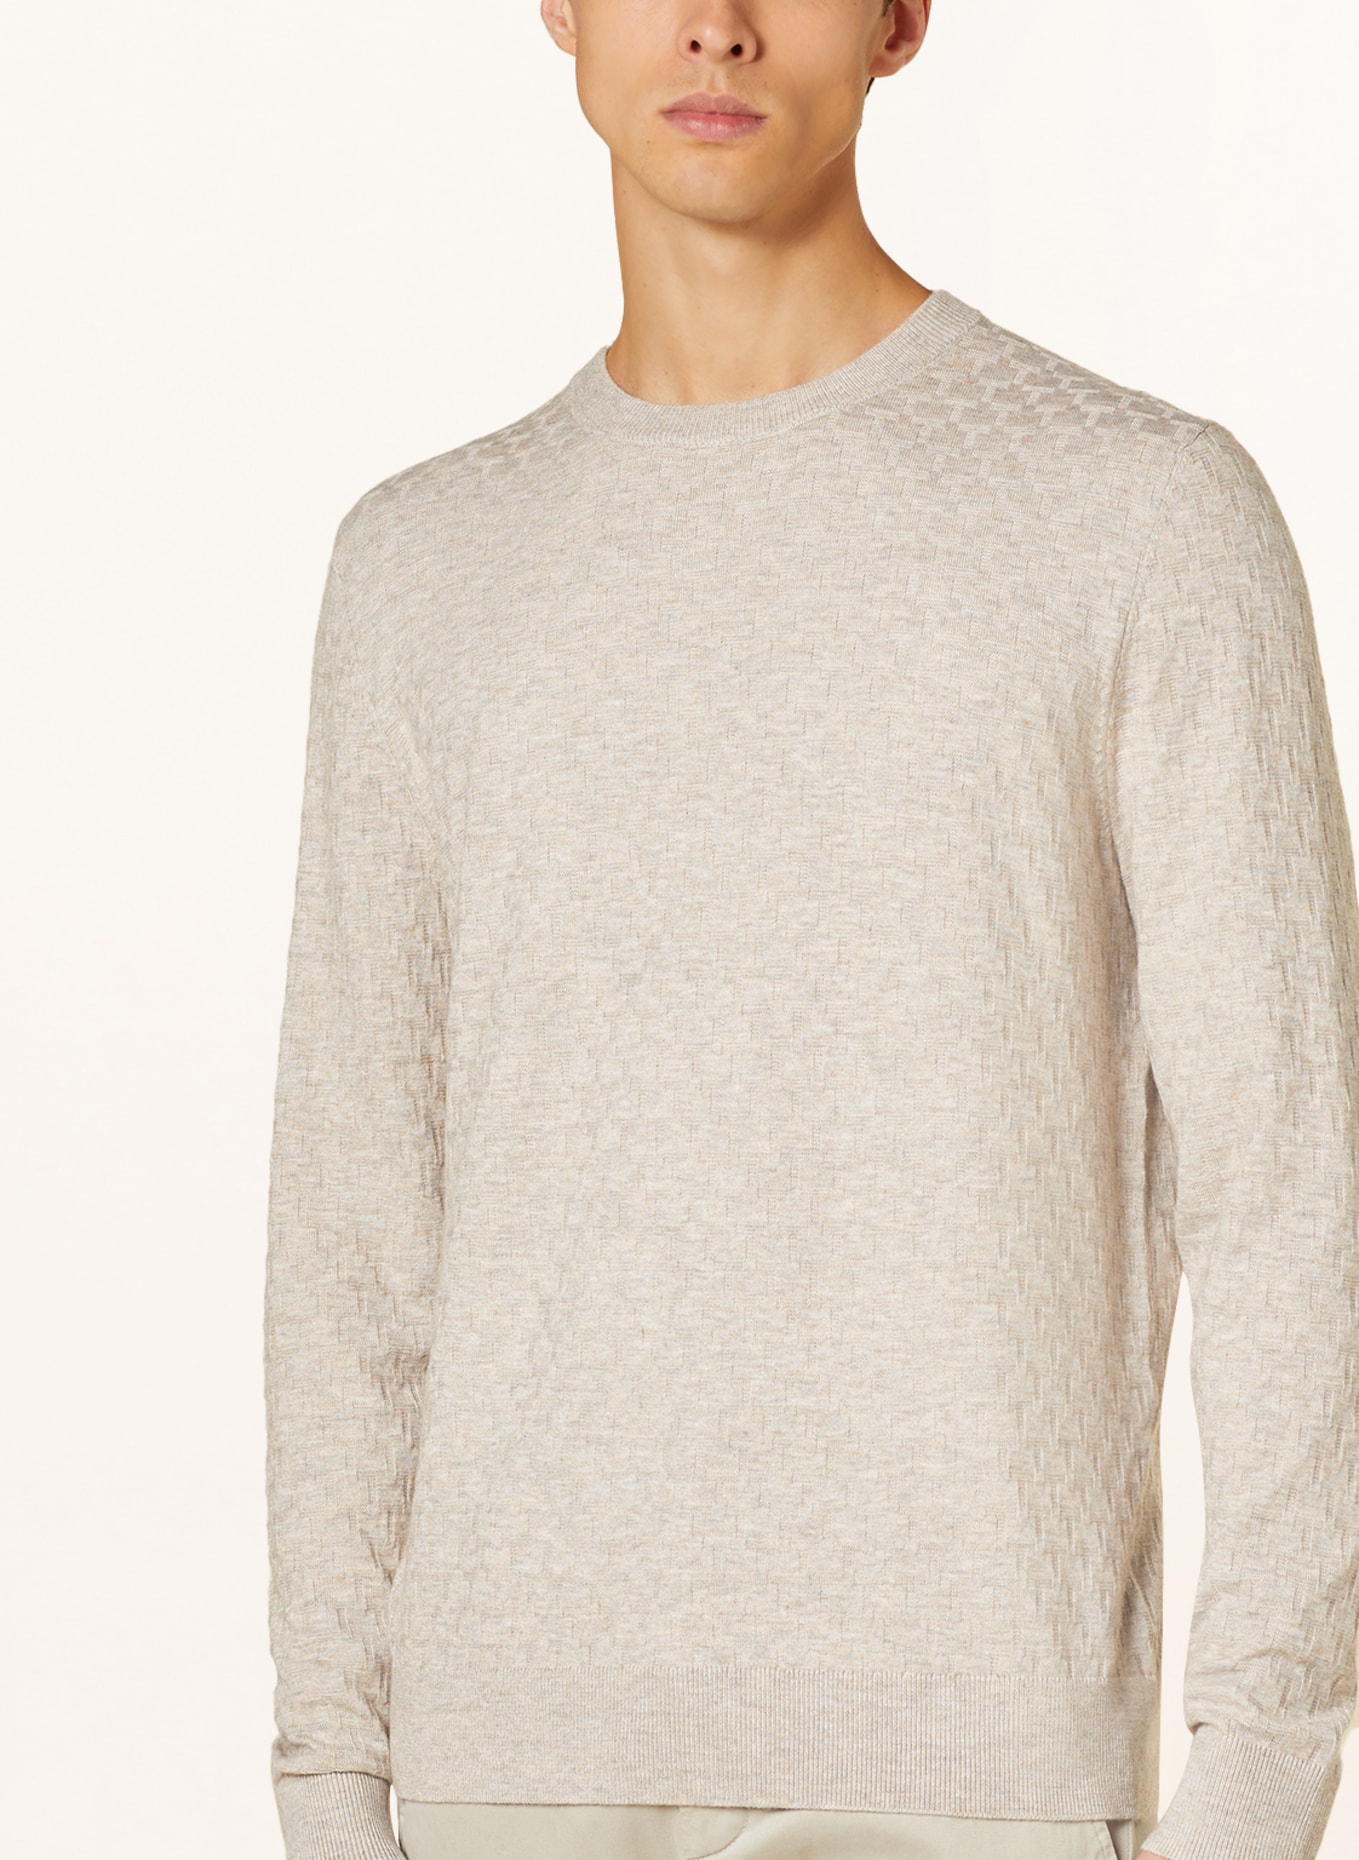 TED BAKER Pullover LOUNG, Farbe: BEIGE (Bild 4)